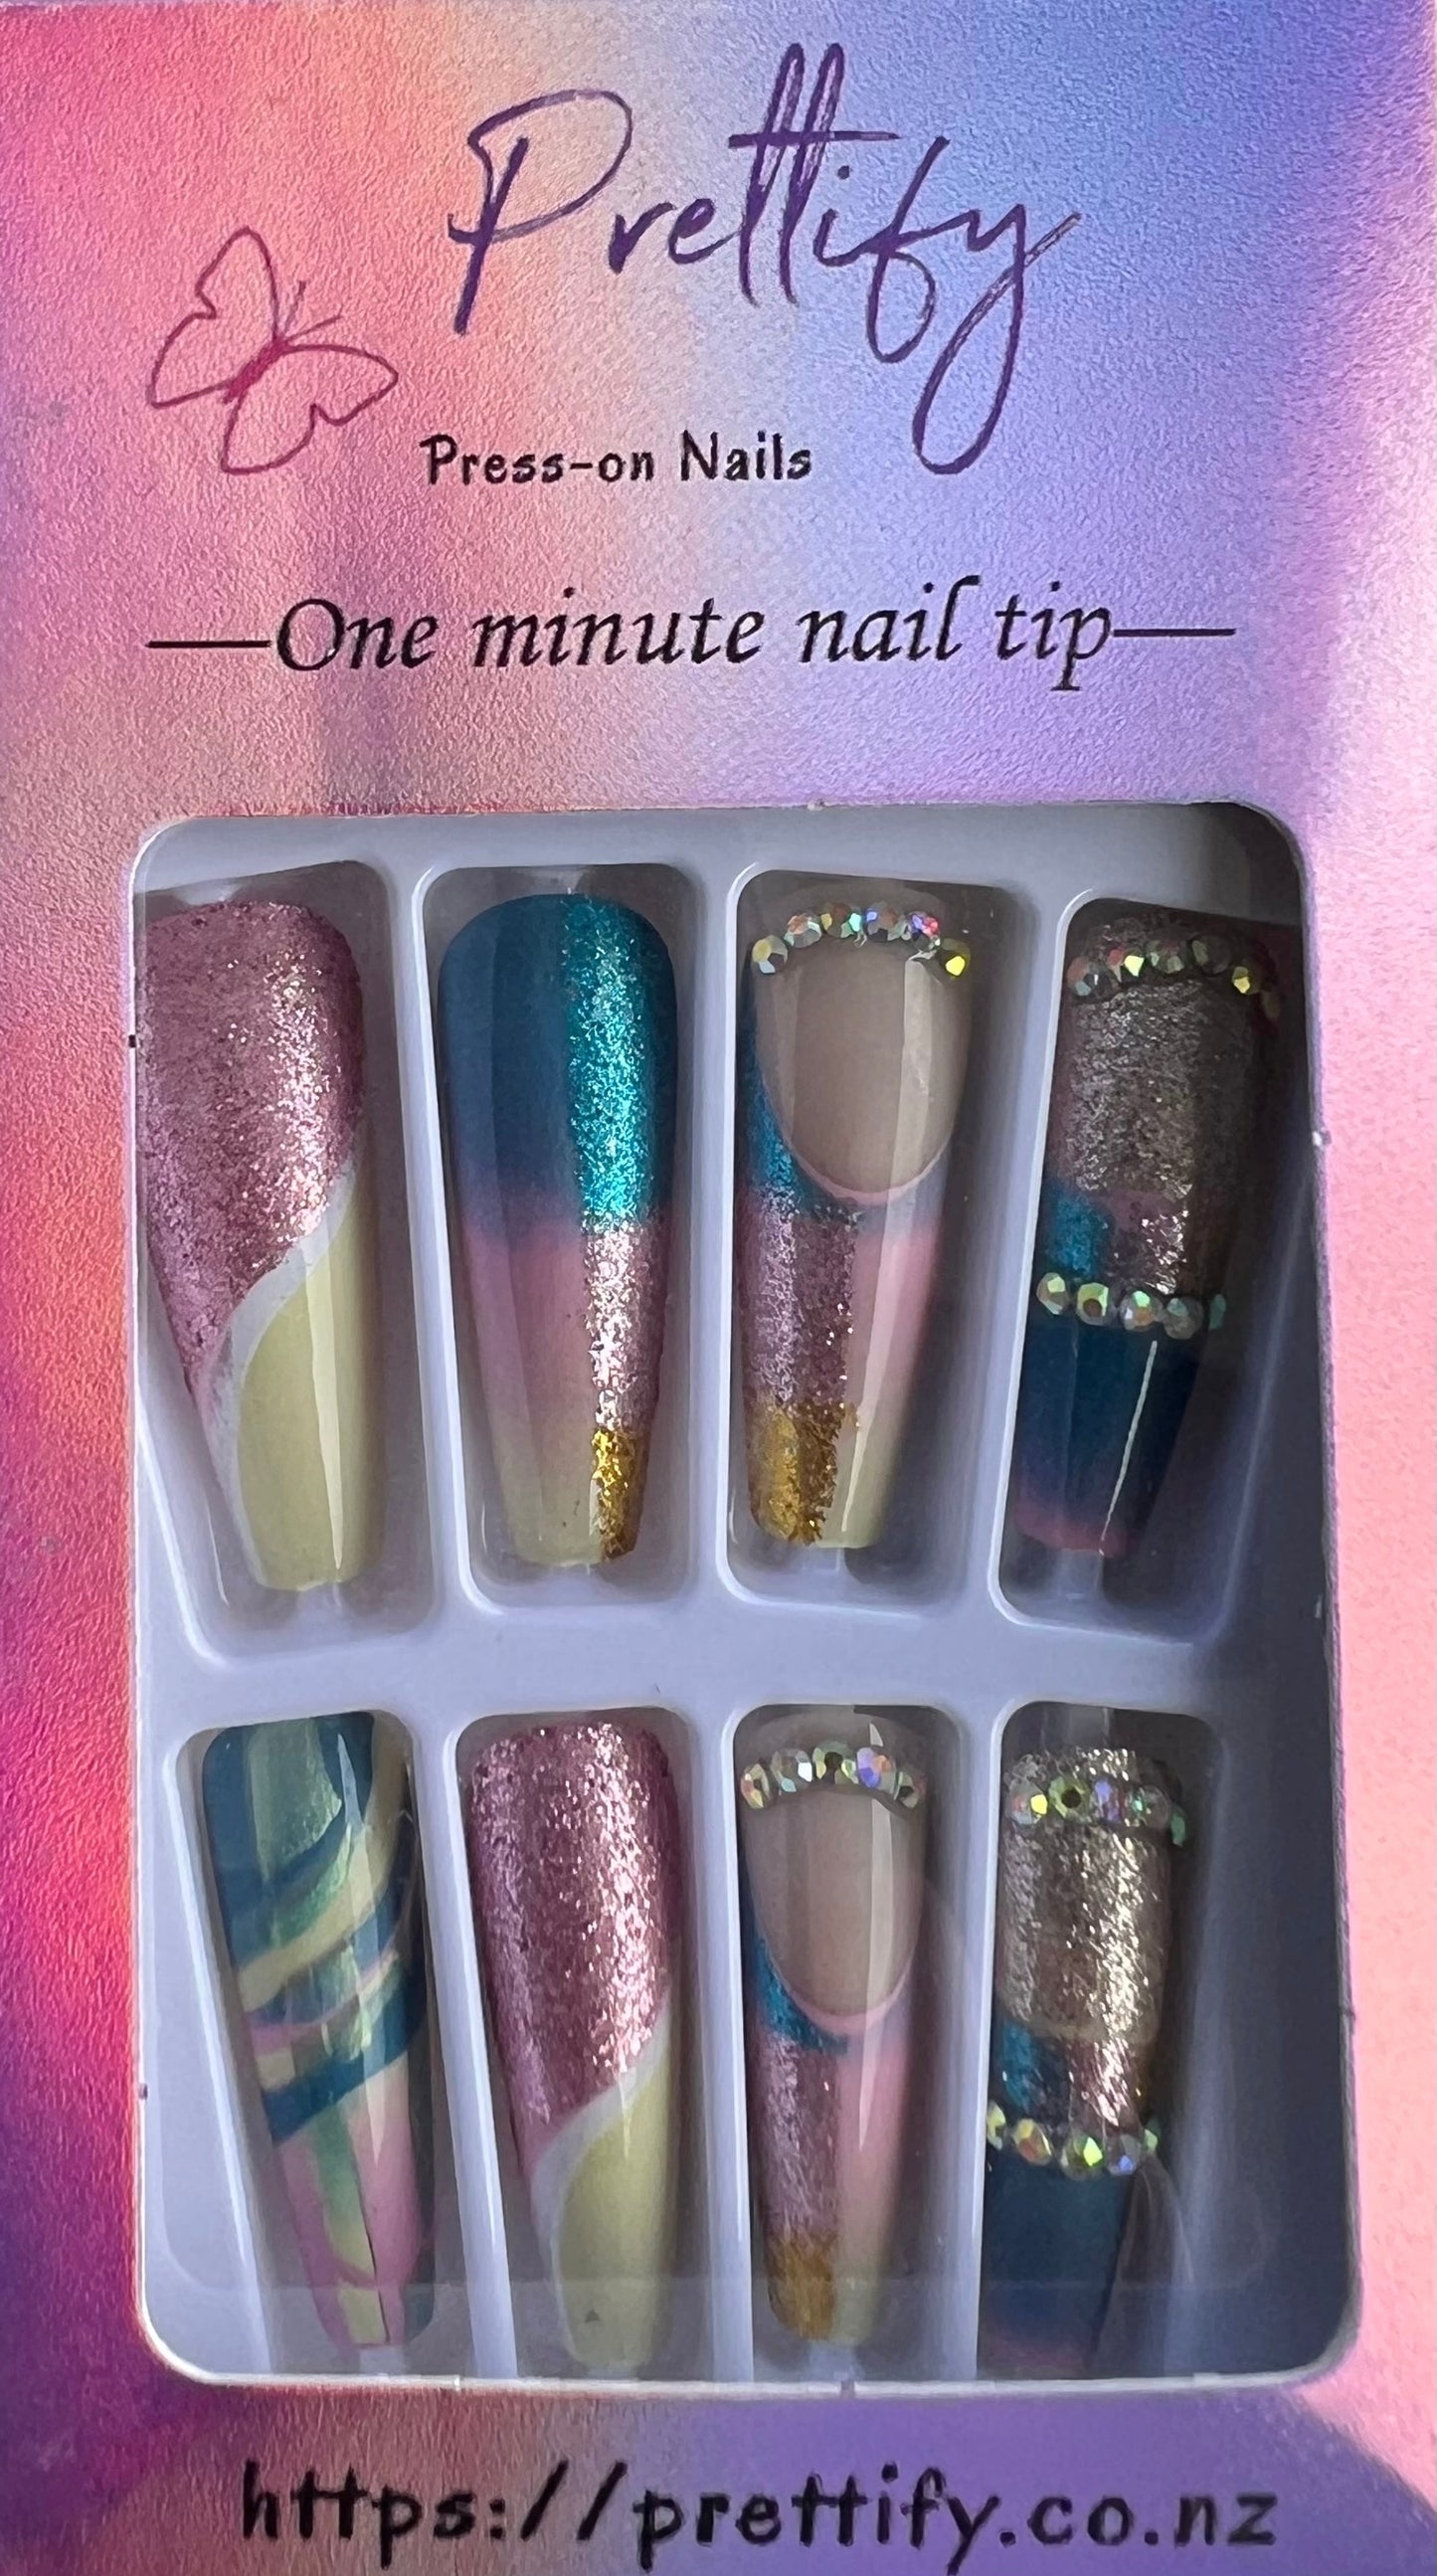 Pale Pink, Blue & Yellow with Glitter & Jewels - Coffin Press on Nails #BKS1517